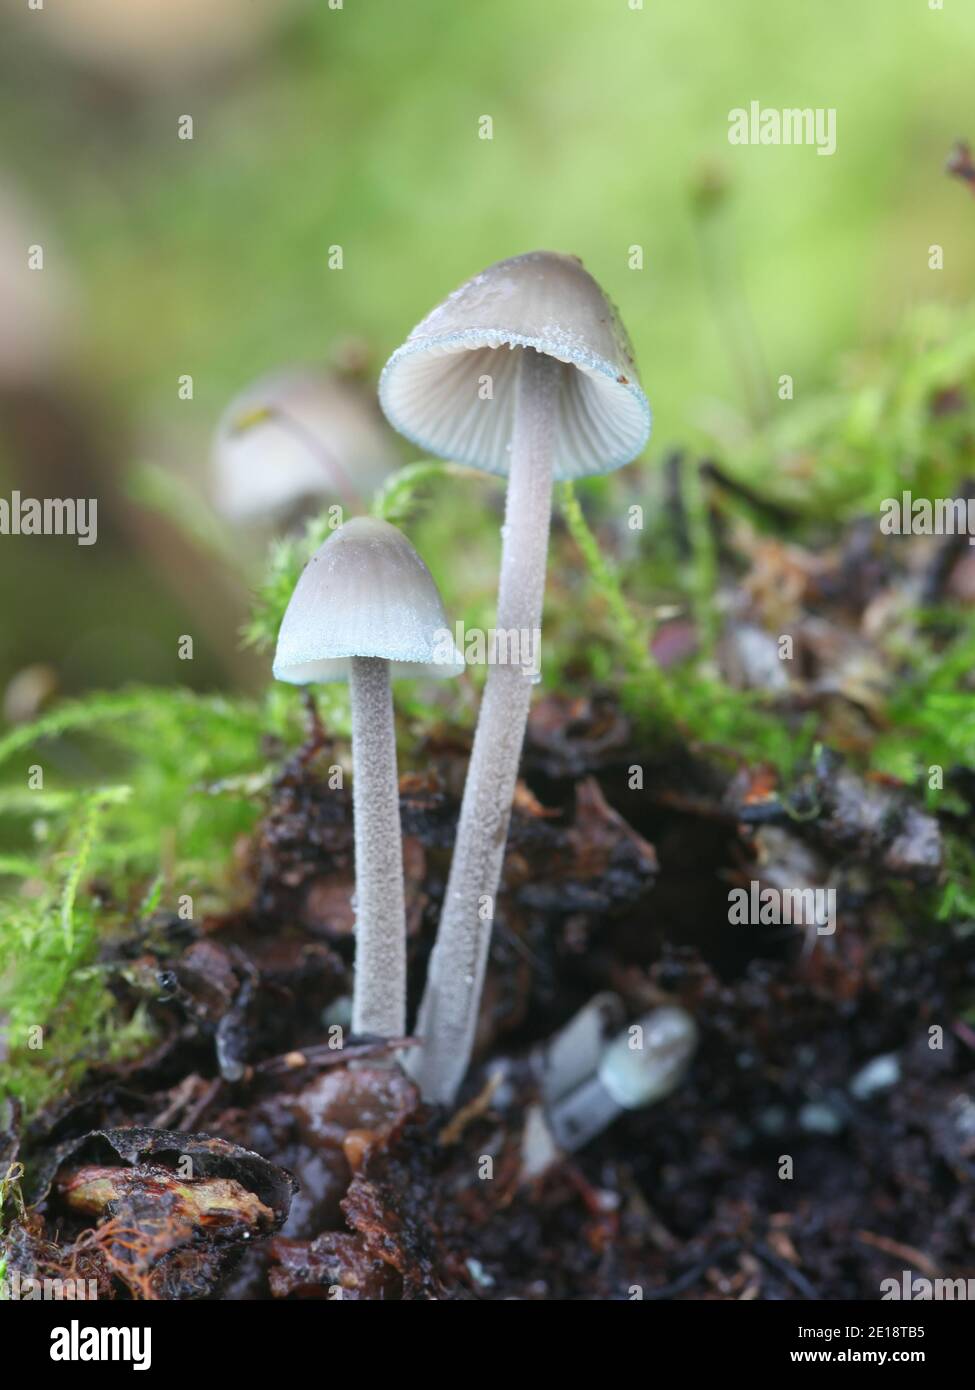 Mycena amicta, known as the coldfoot bonnet, wild mushroom from Finland Stock Photo